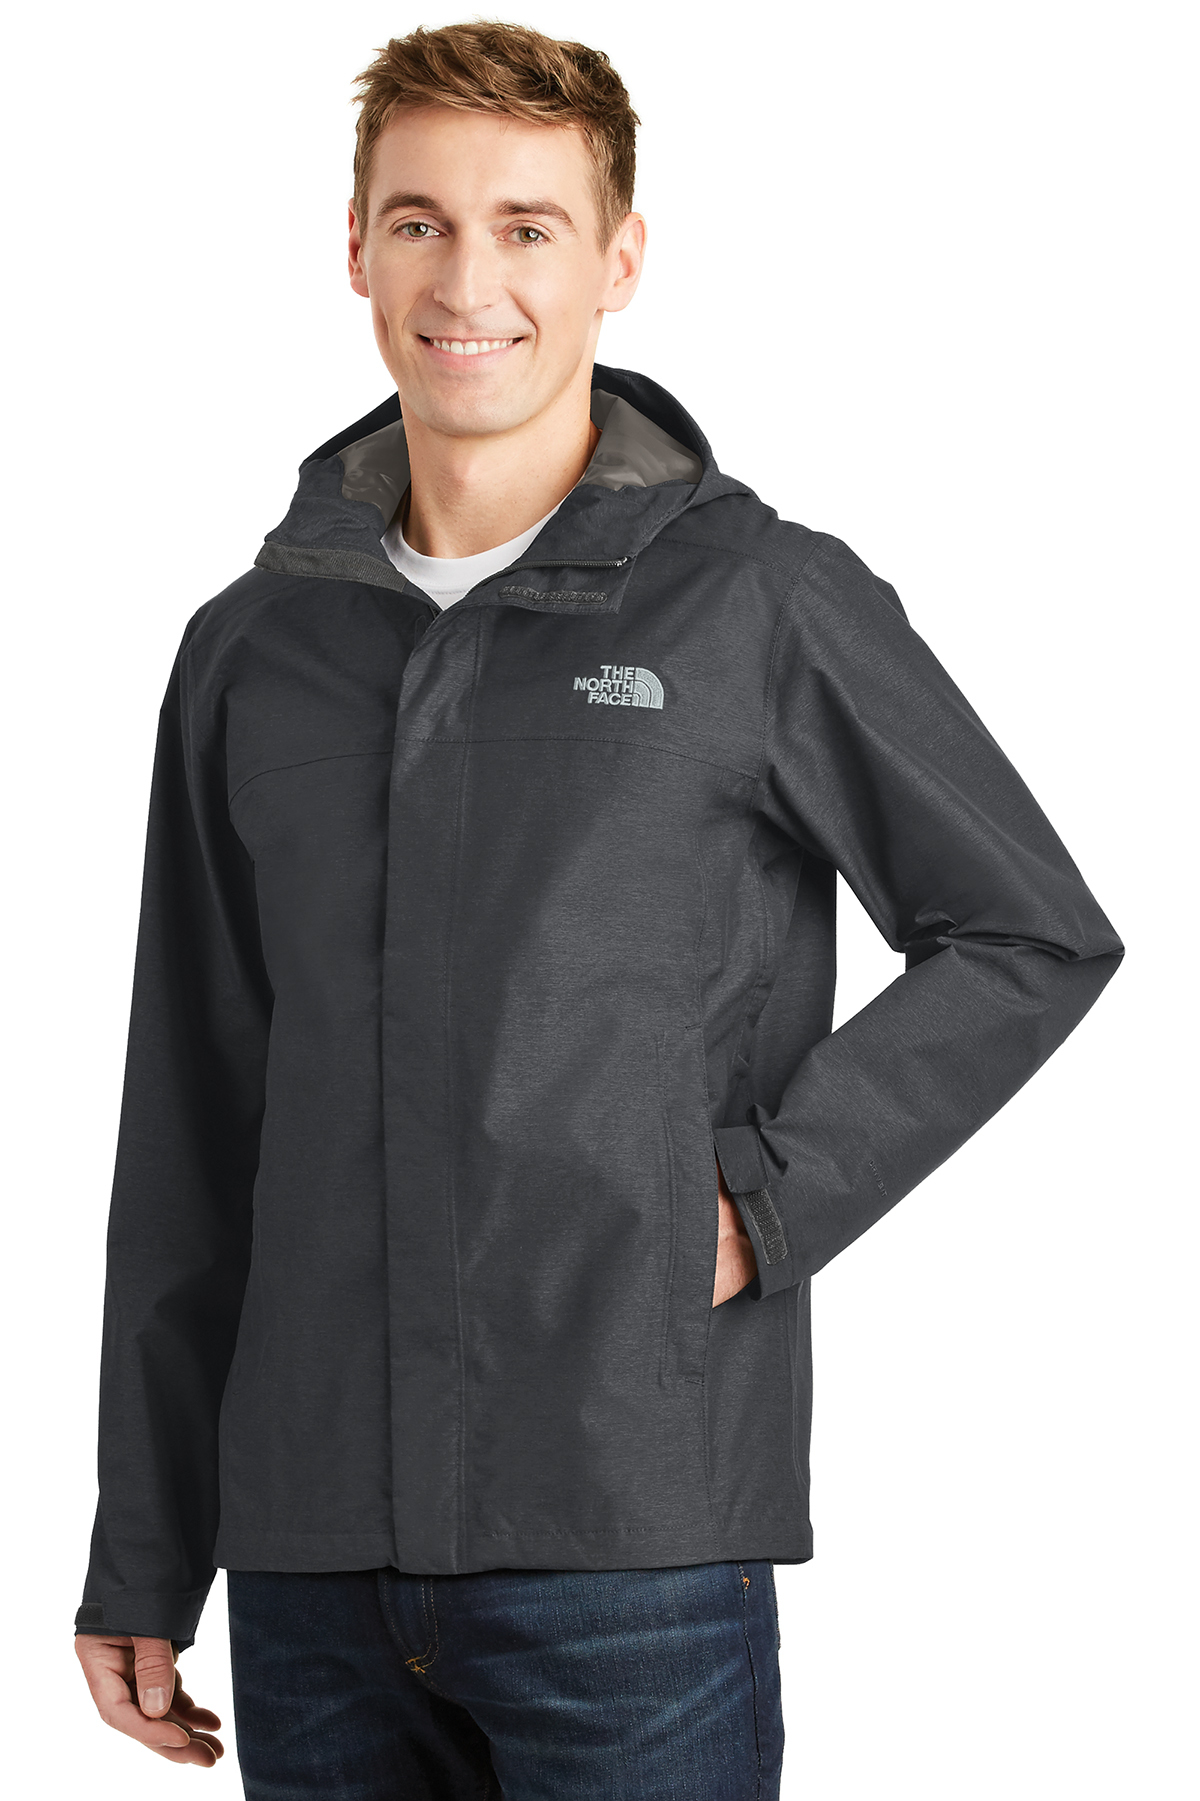 The North Face NF0A3LH4 DryVent Rain Jacket - Shady Blue - S